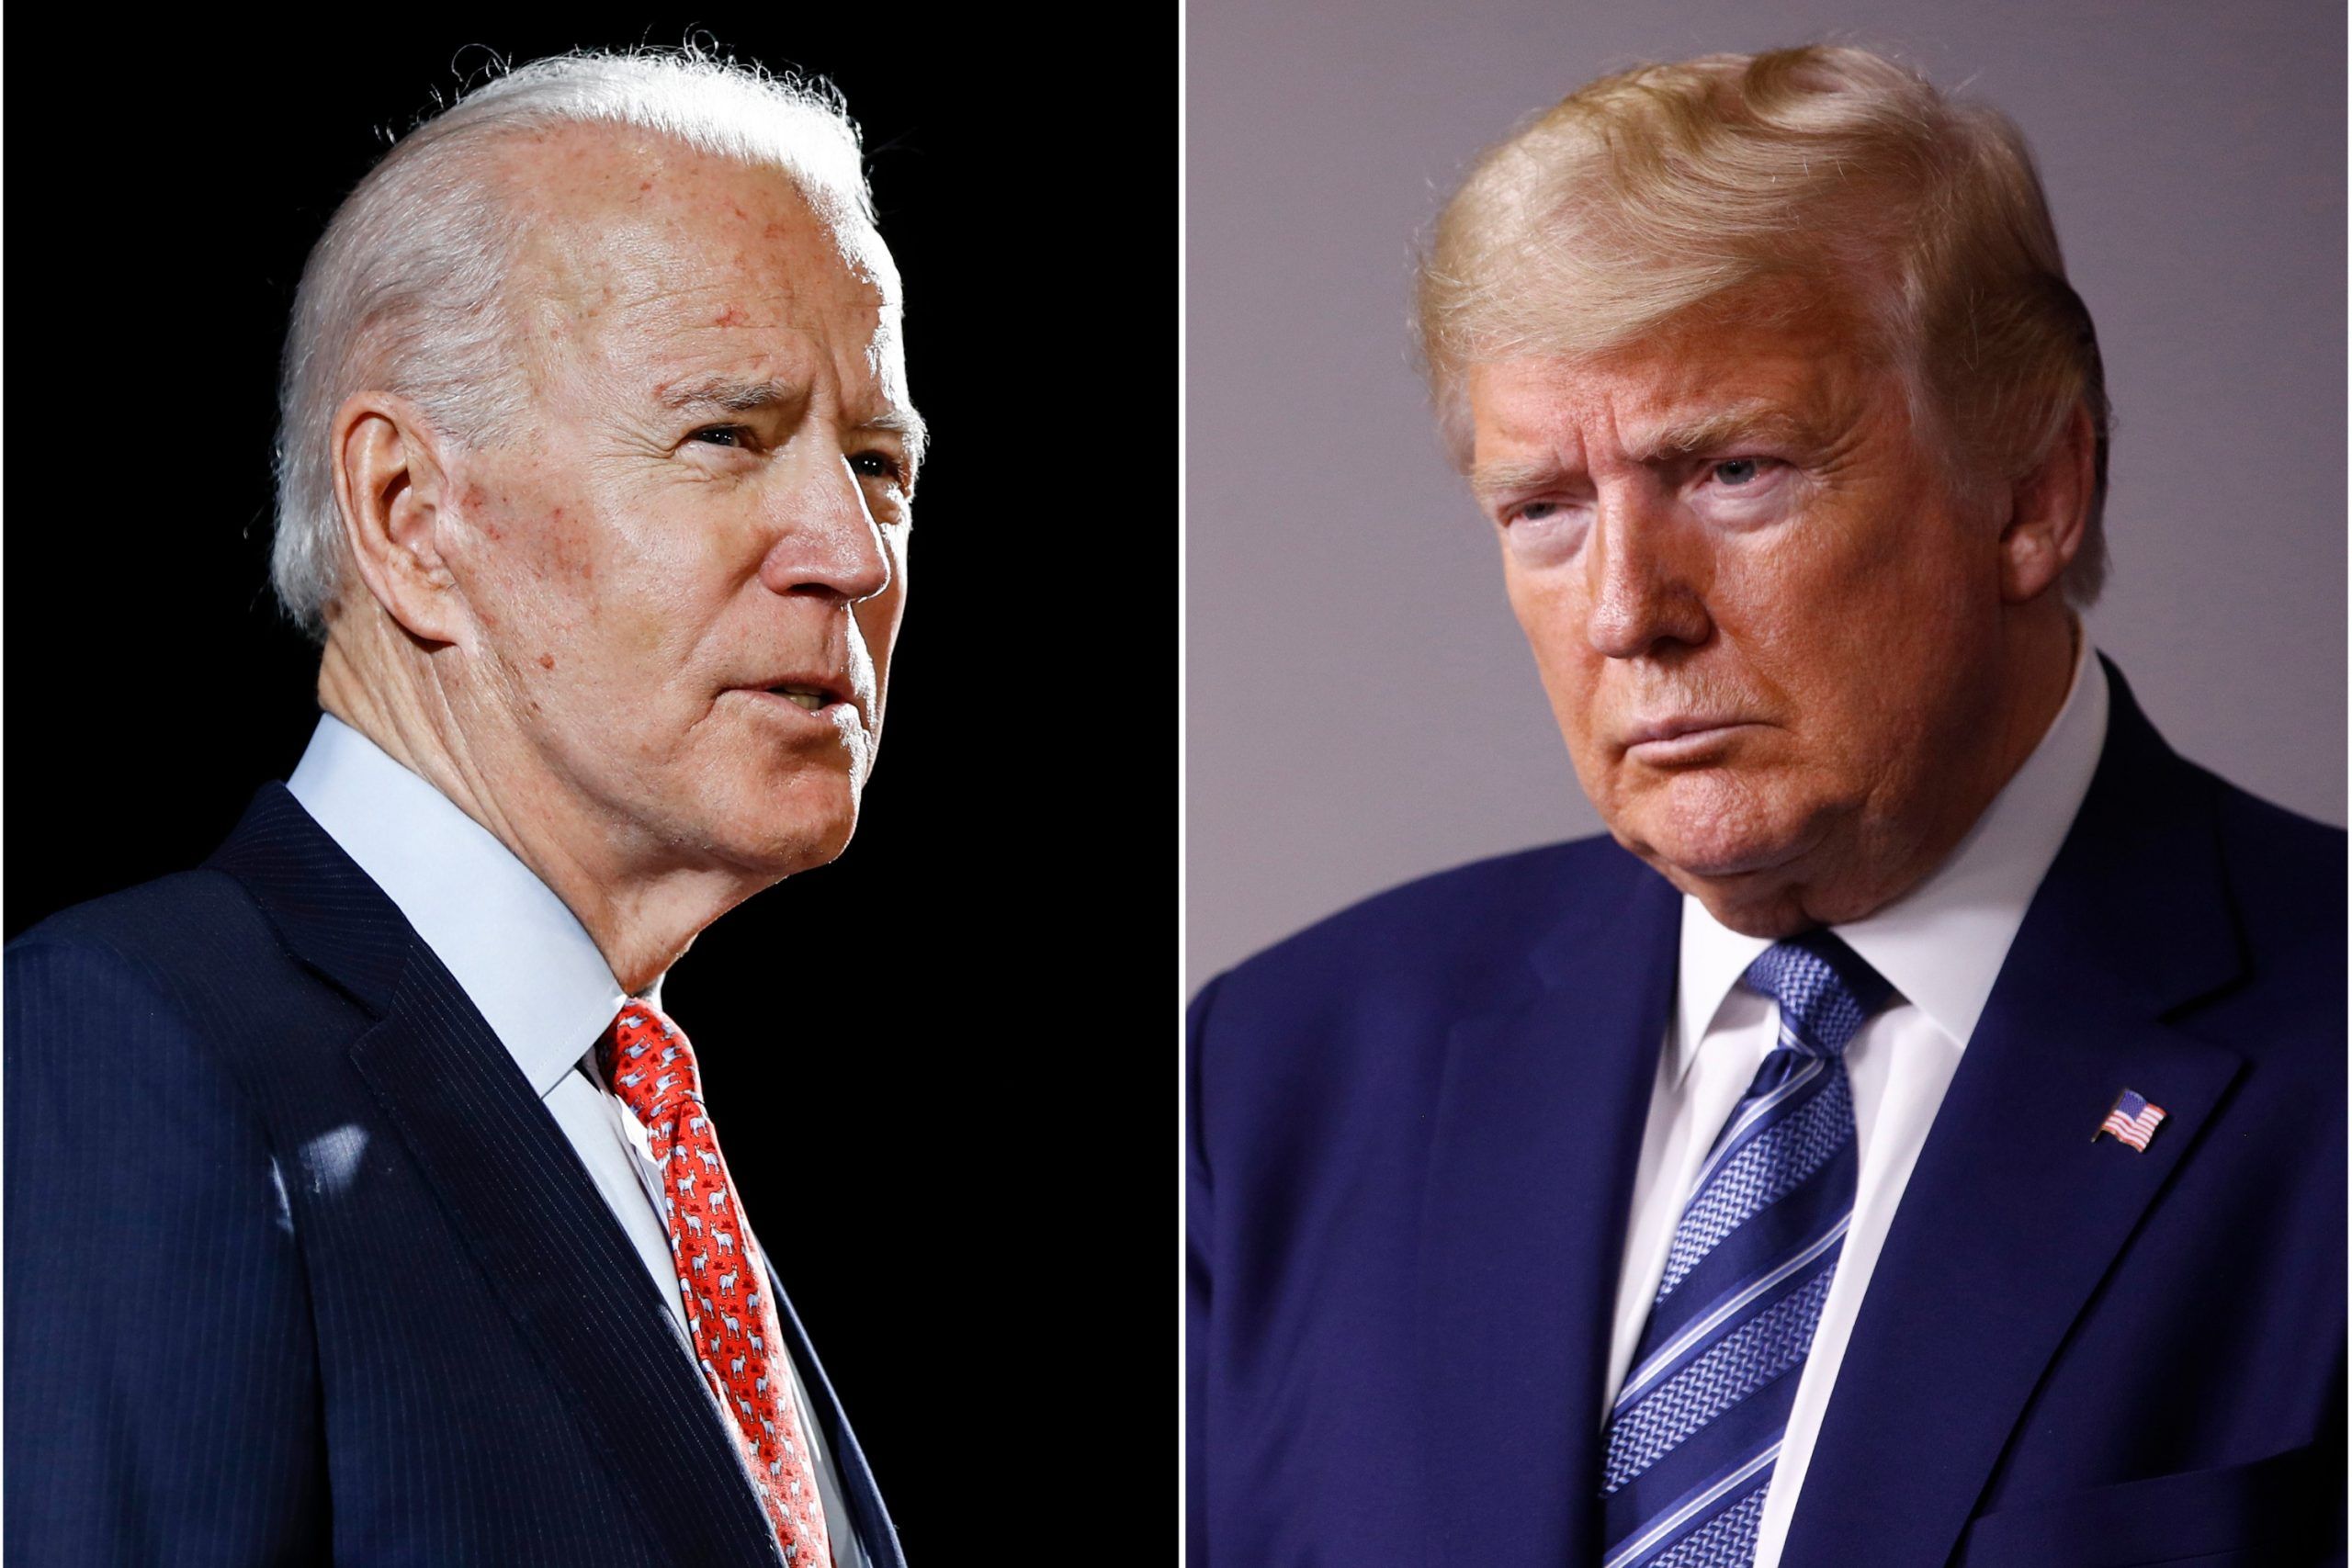 Joe Biden (Left) is the democratic party nominate. Donald Trump is the current President of the United States. 